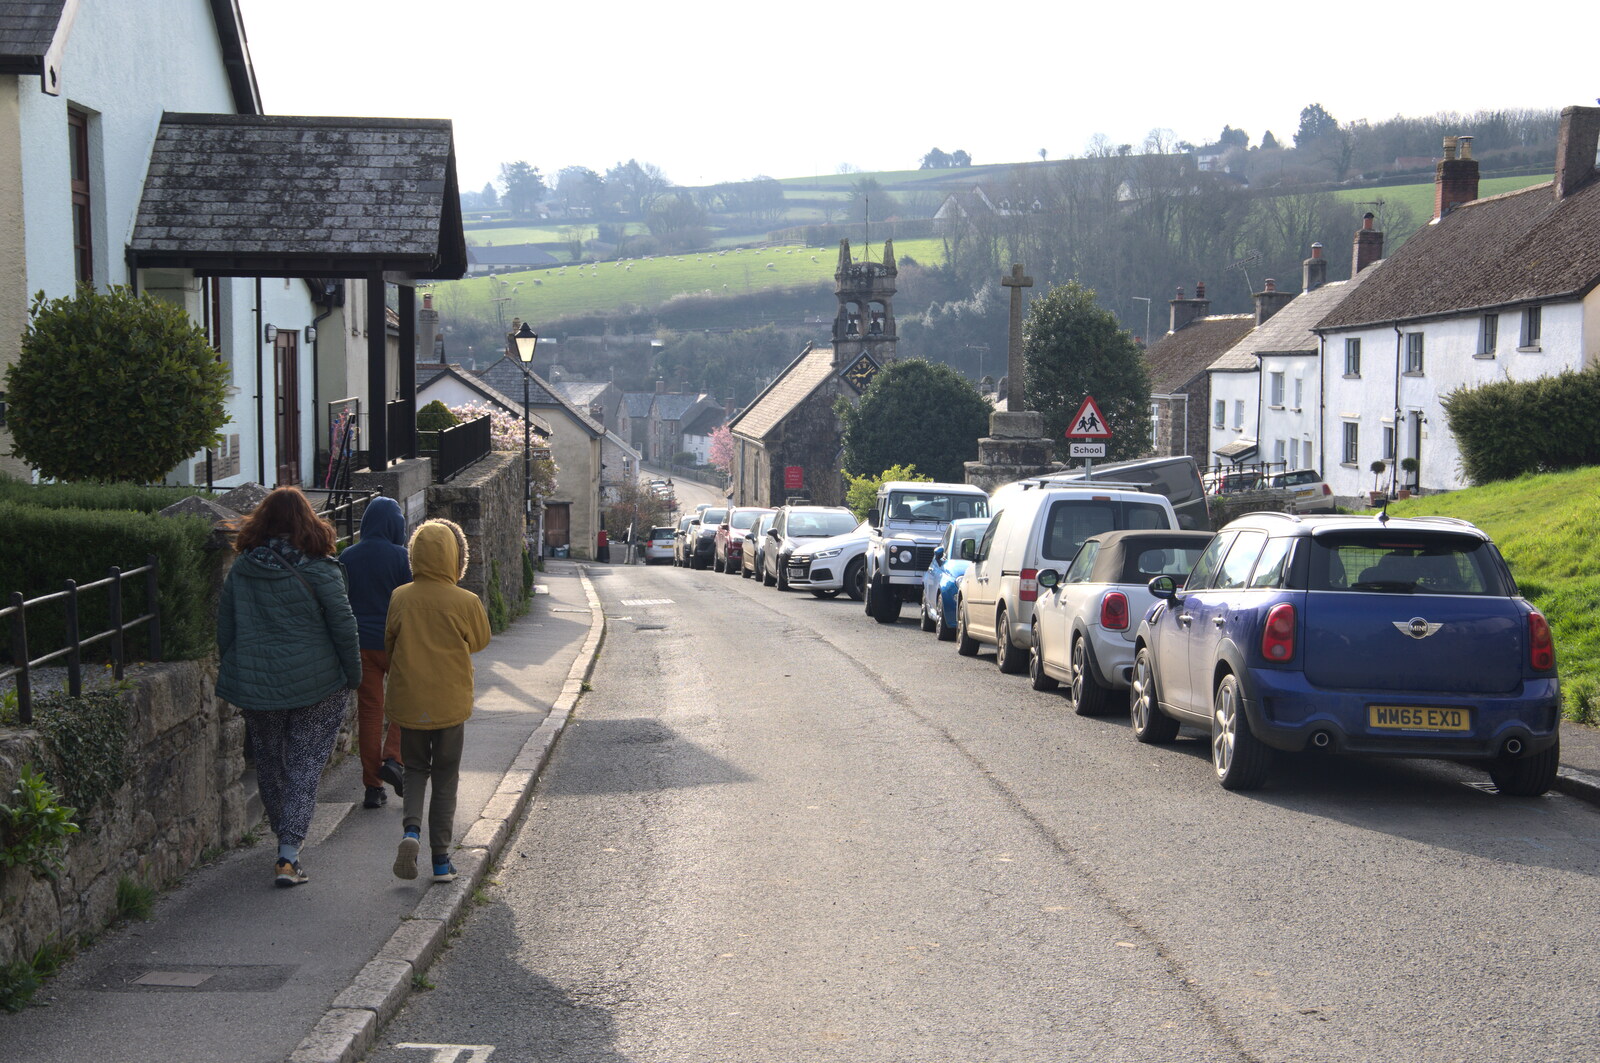 We walk down the main road through the village from Easter in South Zeal and Moretonhampstead, Devon - 9th April